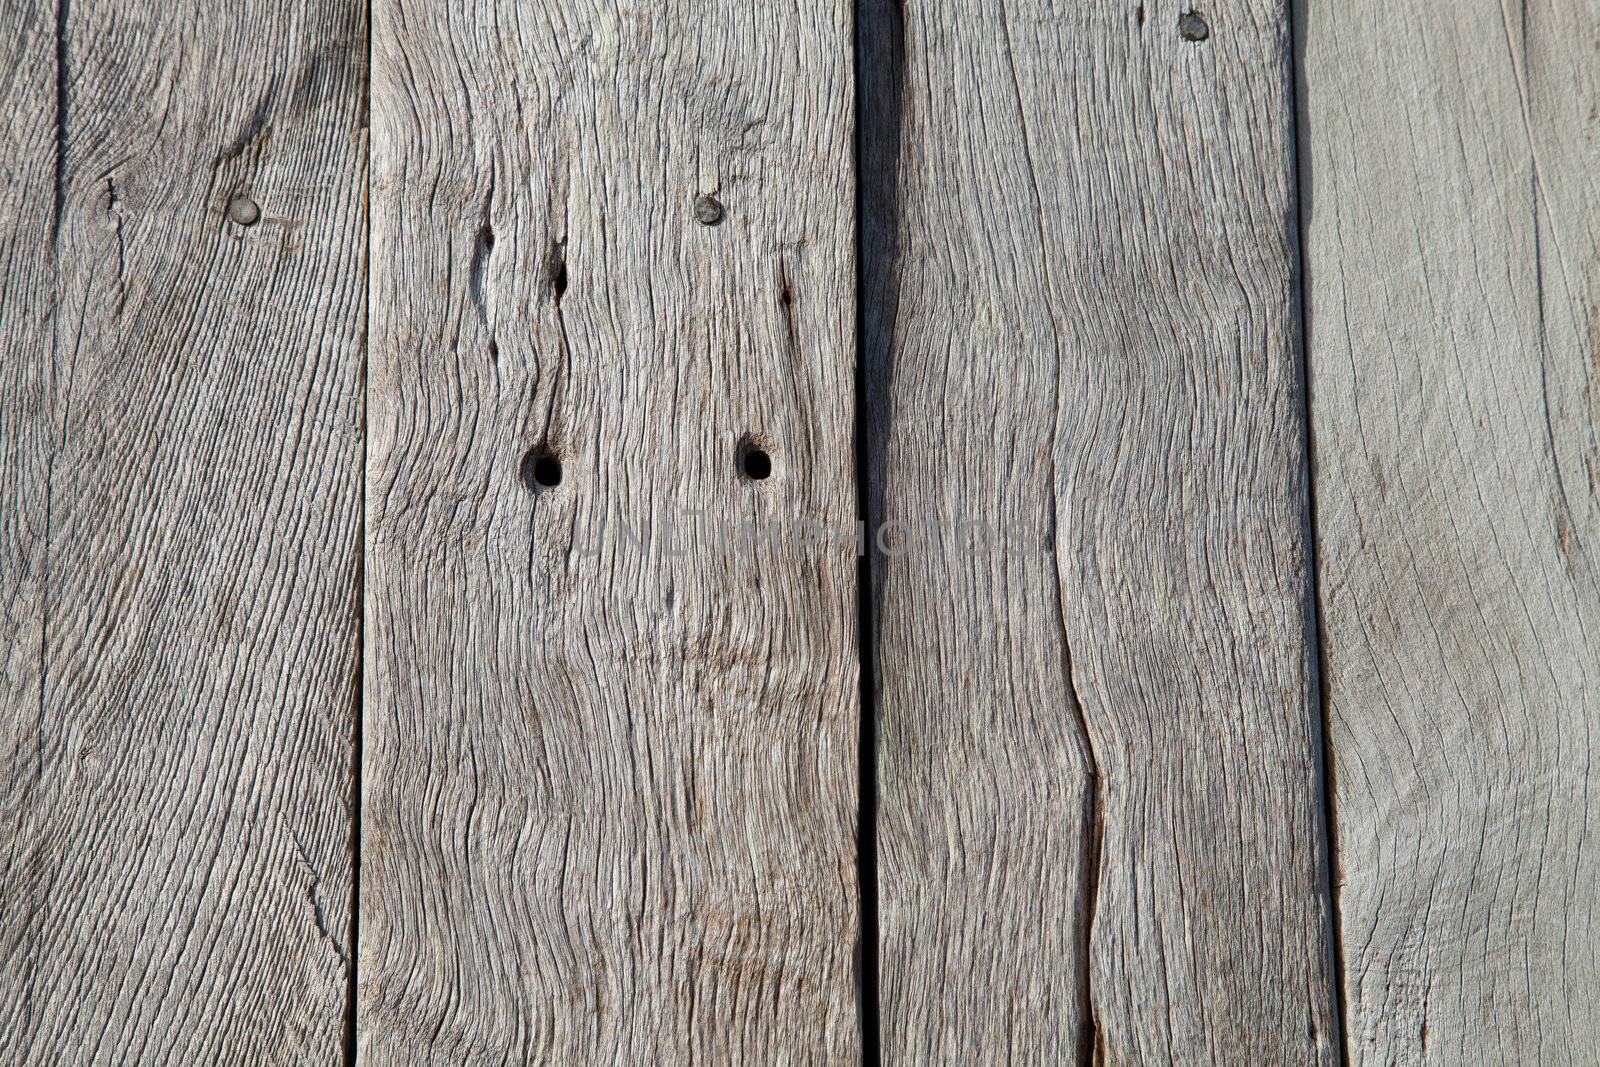 Planks of sun bleached oak with grain, joints, holes and cracks.